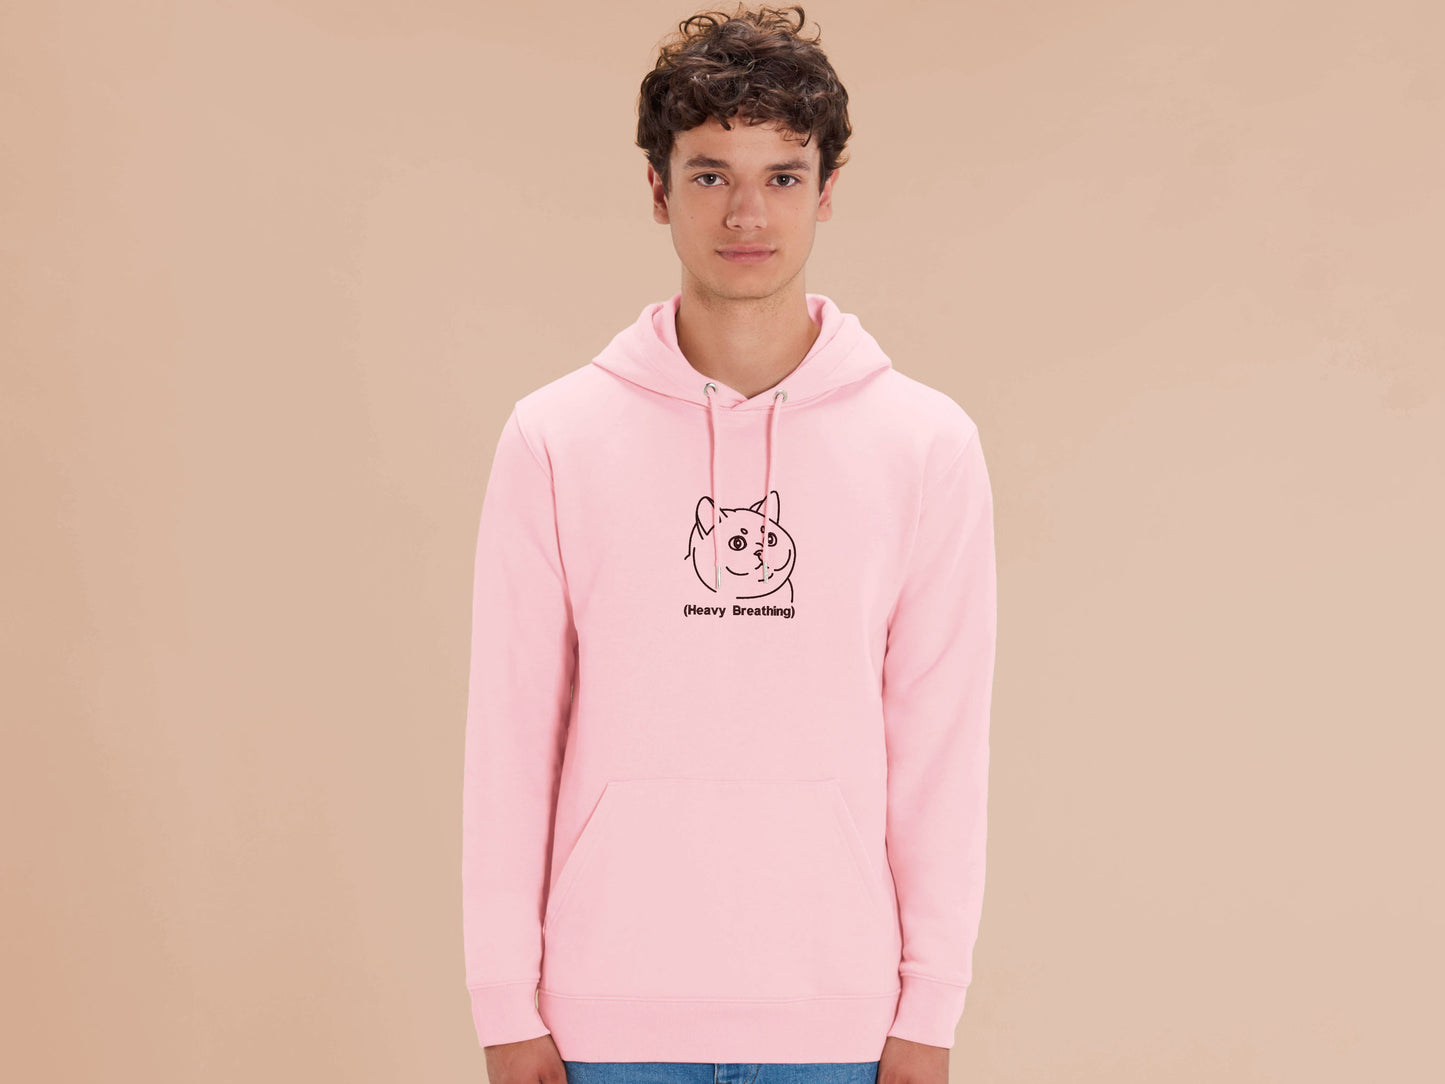 A man wearing a pink long sleeve fleece hoodie, with an embroidered brown thread design of cute fat cat portrait with text underneath saying (Heavy Breathing)